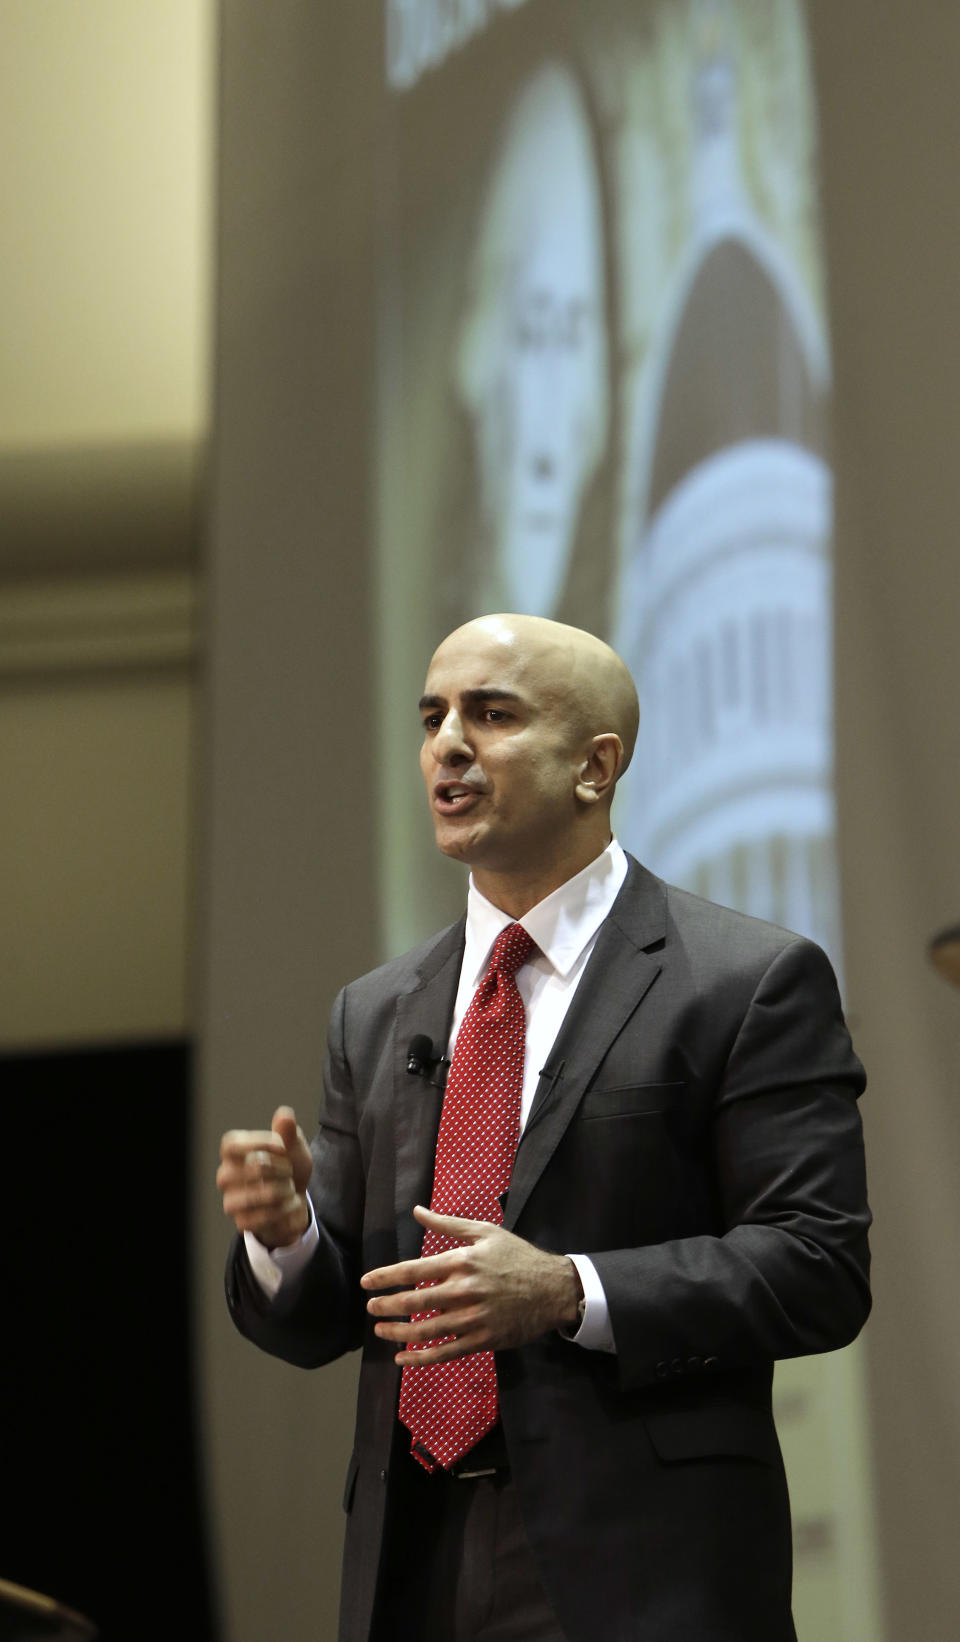 In this Jan. 21, 2014 photo, Neel Kashkari, a former U.S. Treasury official, announces that he will run for governor of California, during an appearance at the Sacramento Business Review at California State University, Sacramento in Sacramento, Calif., When Kashkari, 40, a Republican, announced that he is running for governor, he became the latest Californian of second-generation Indian descent to emerge in politics, despite their relatively small population.(AP Photo/Rich Pedroncelli)